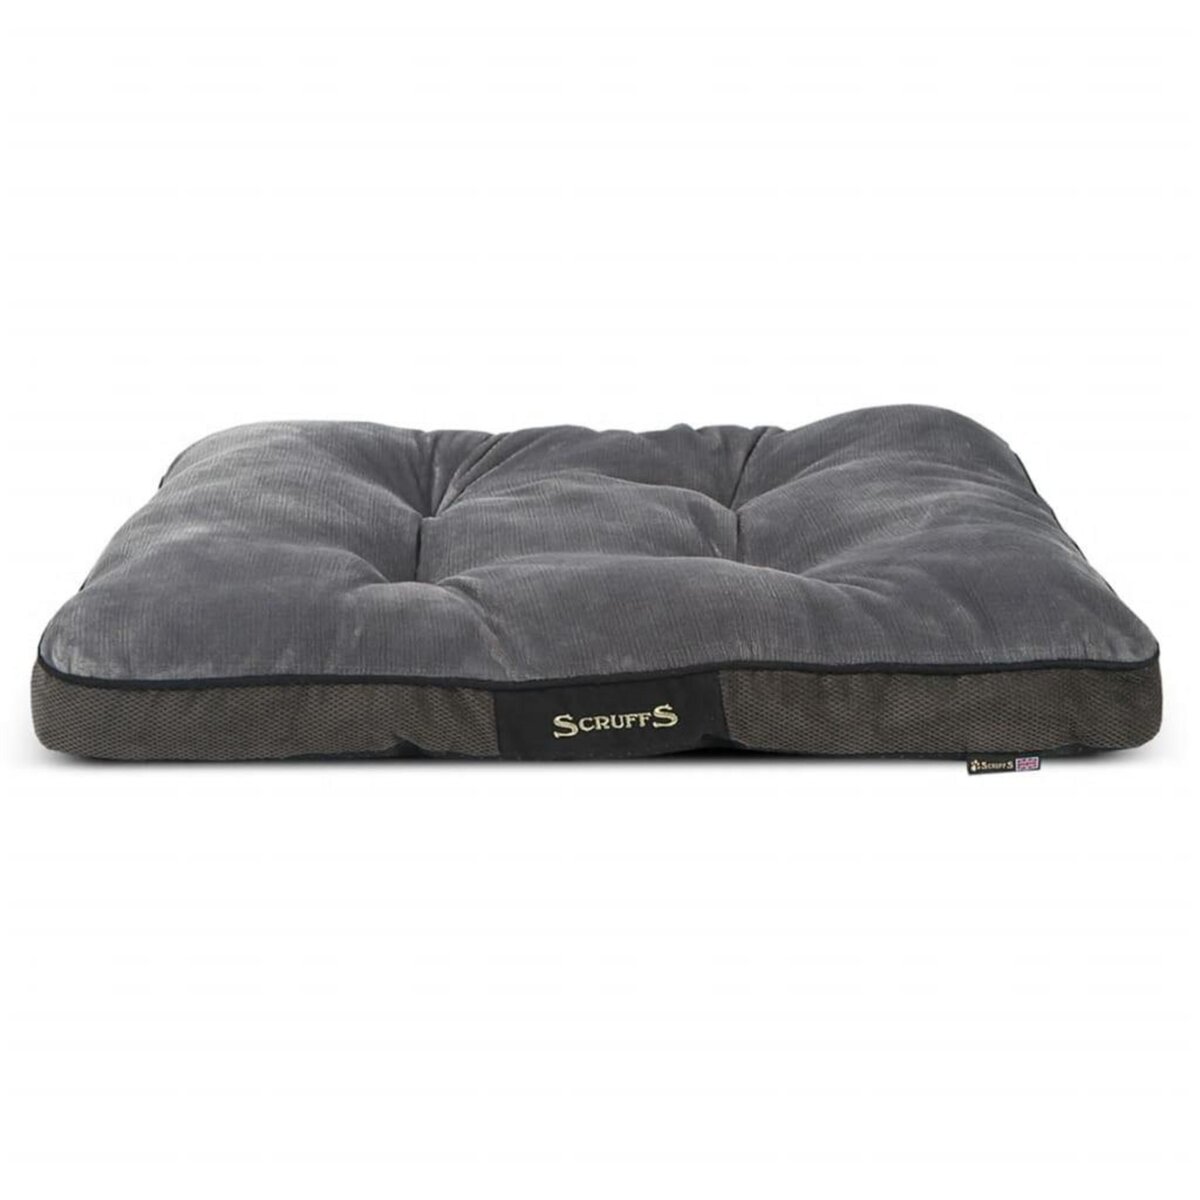 Scruffs & Tramps Scruffs & Tramps Matelas pour chiens Chester Taille M Gris 1160